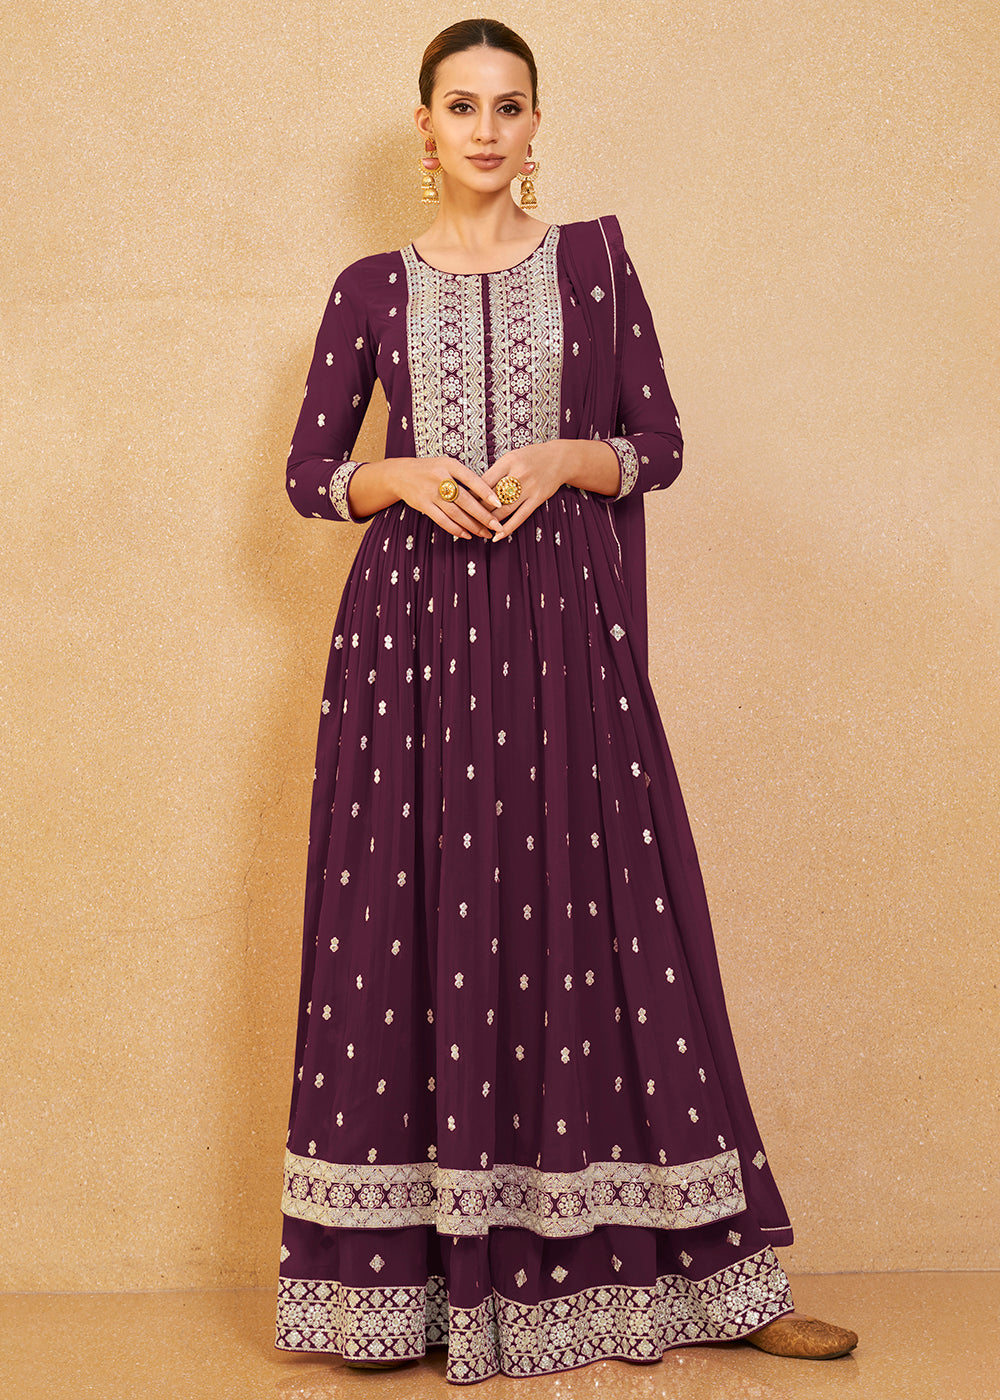 Buy Now Charming Wine Real Georgette Palazzo Style Salwar Suit Online in USA, UK, Canada, Germany, Australia & Worldwide at Empress Clothing.